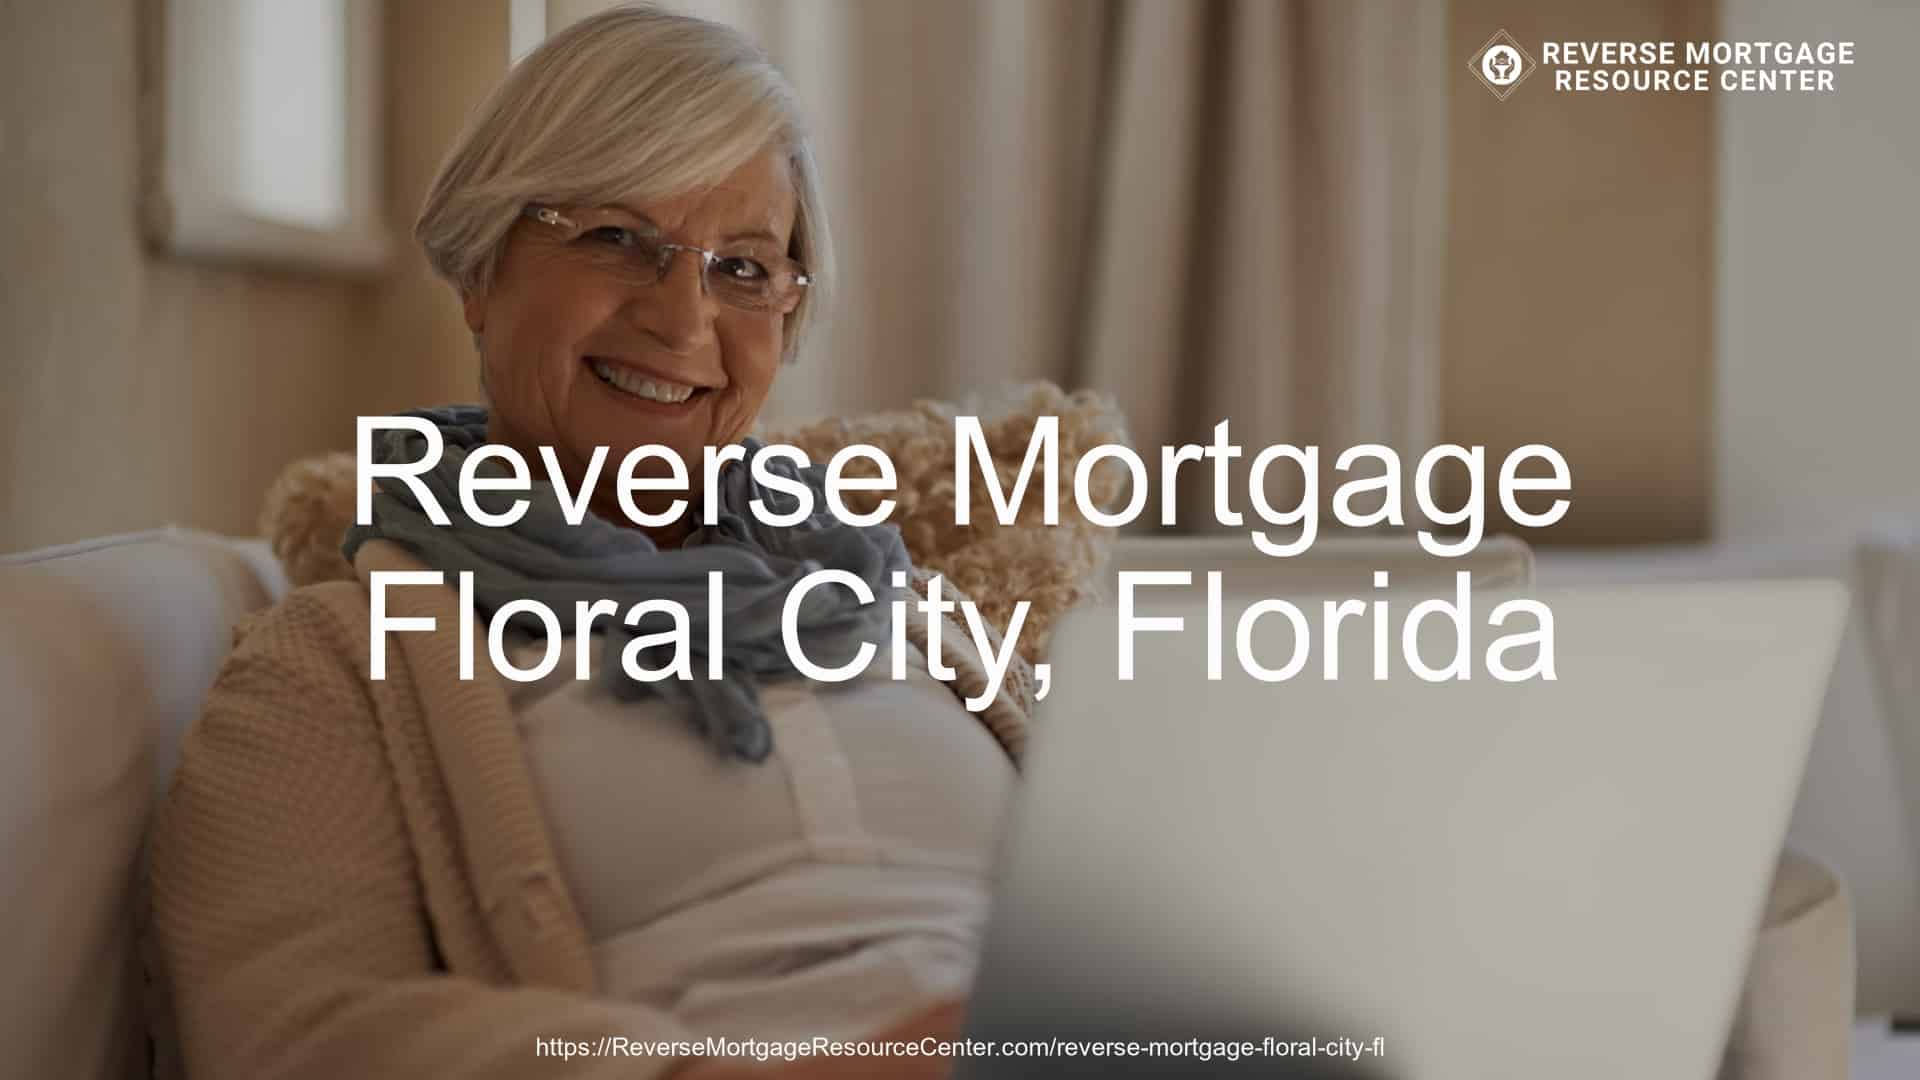 Reverse Mortgage in Floral City, FL